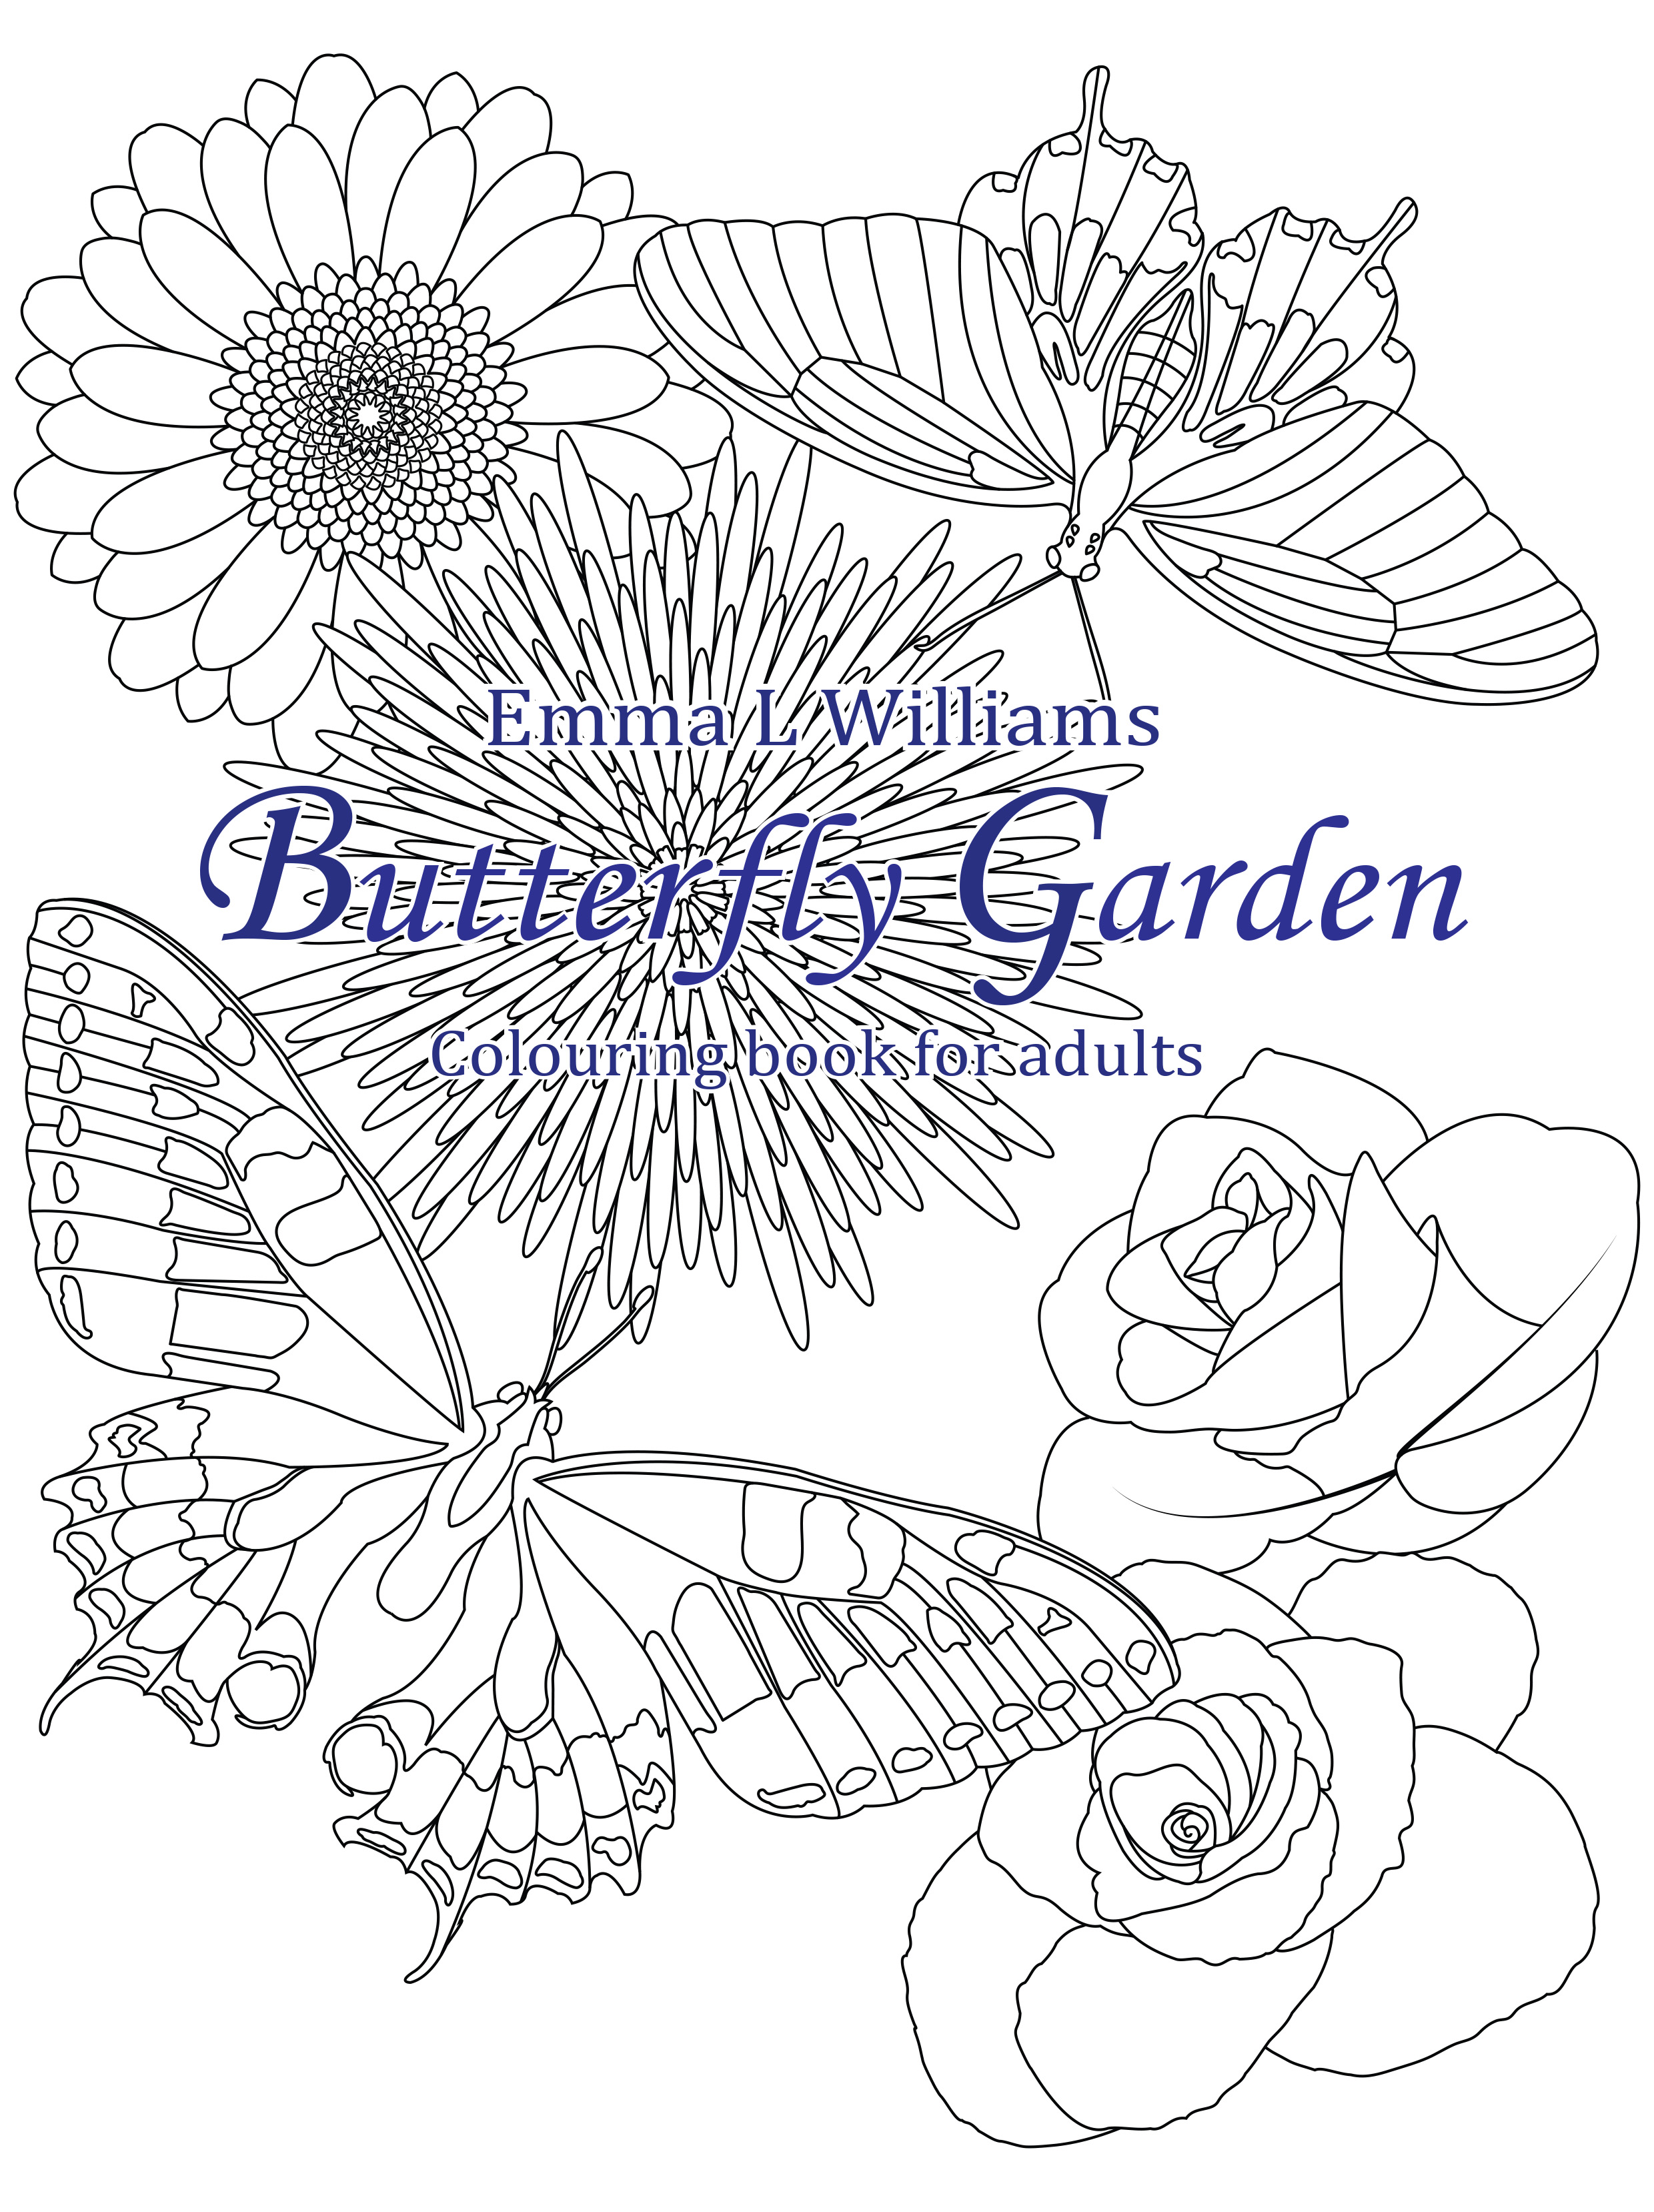 'Butterfly garden' coloring book cover, by Emma L Williams, Artist : Emma L Williams